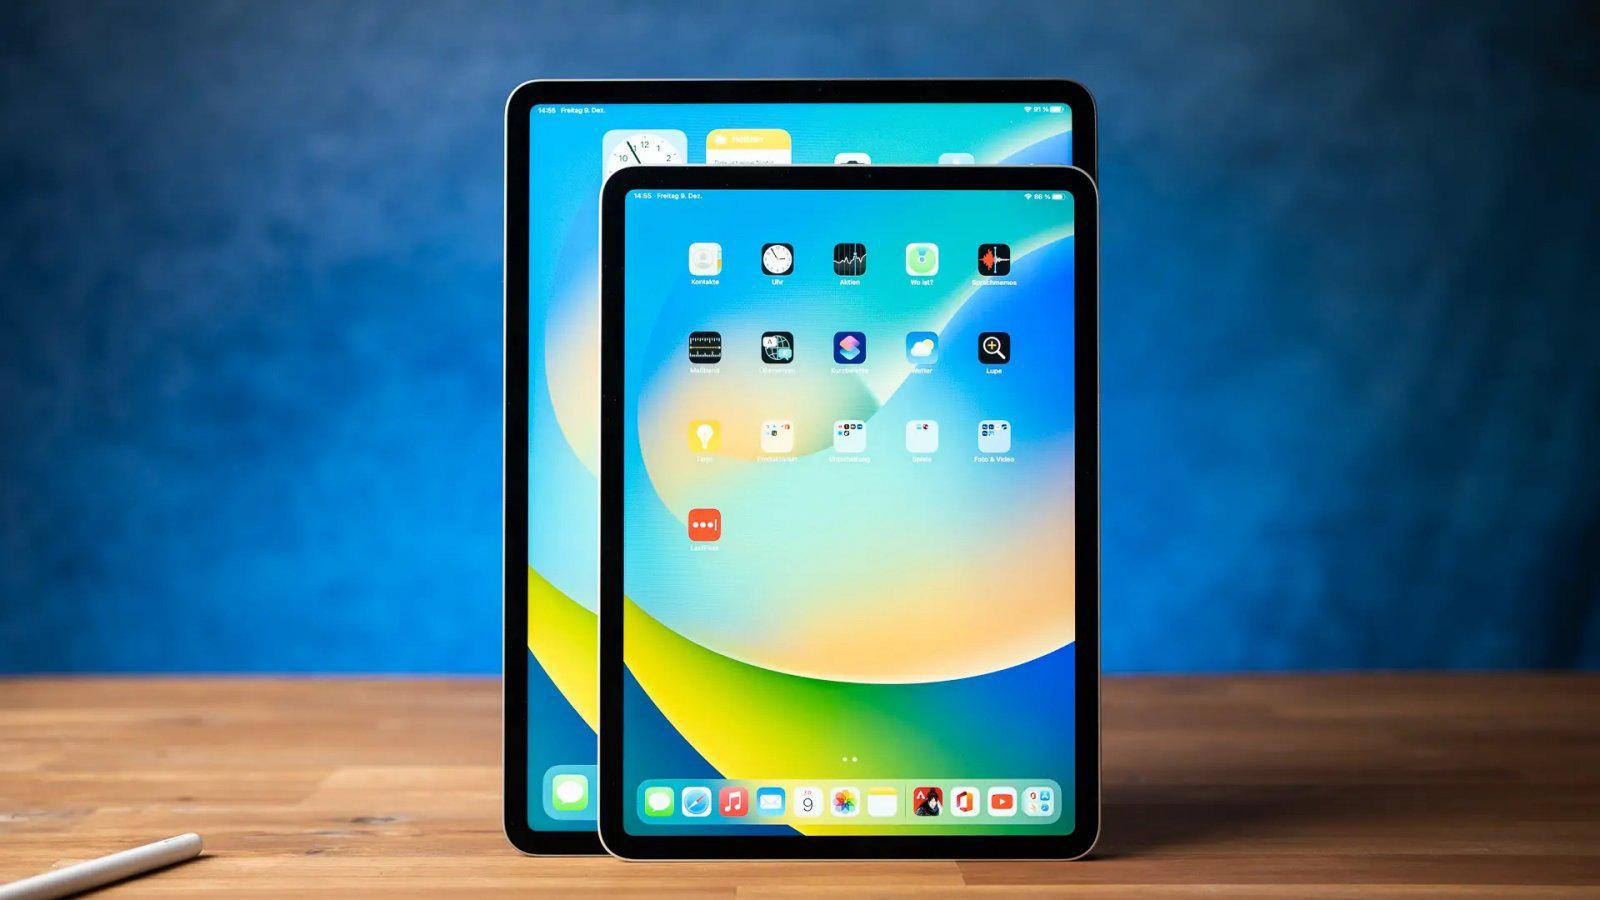 New 12.9-inch iPad Pro Oled and iPad Air, here's what they will look like